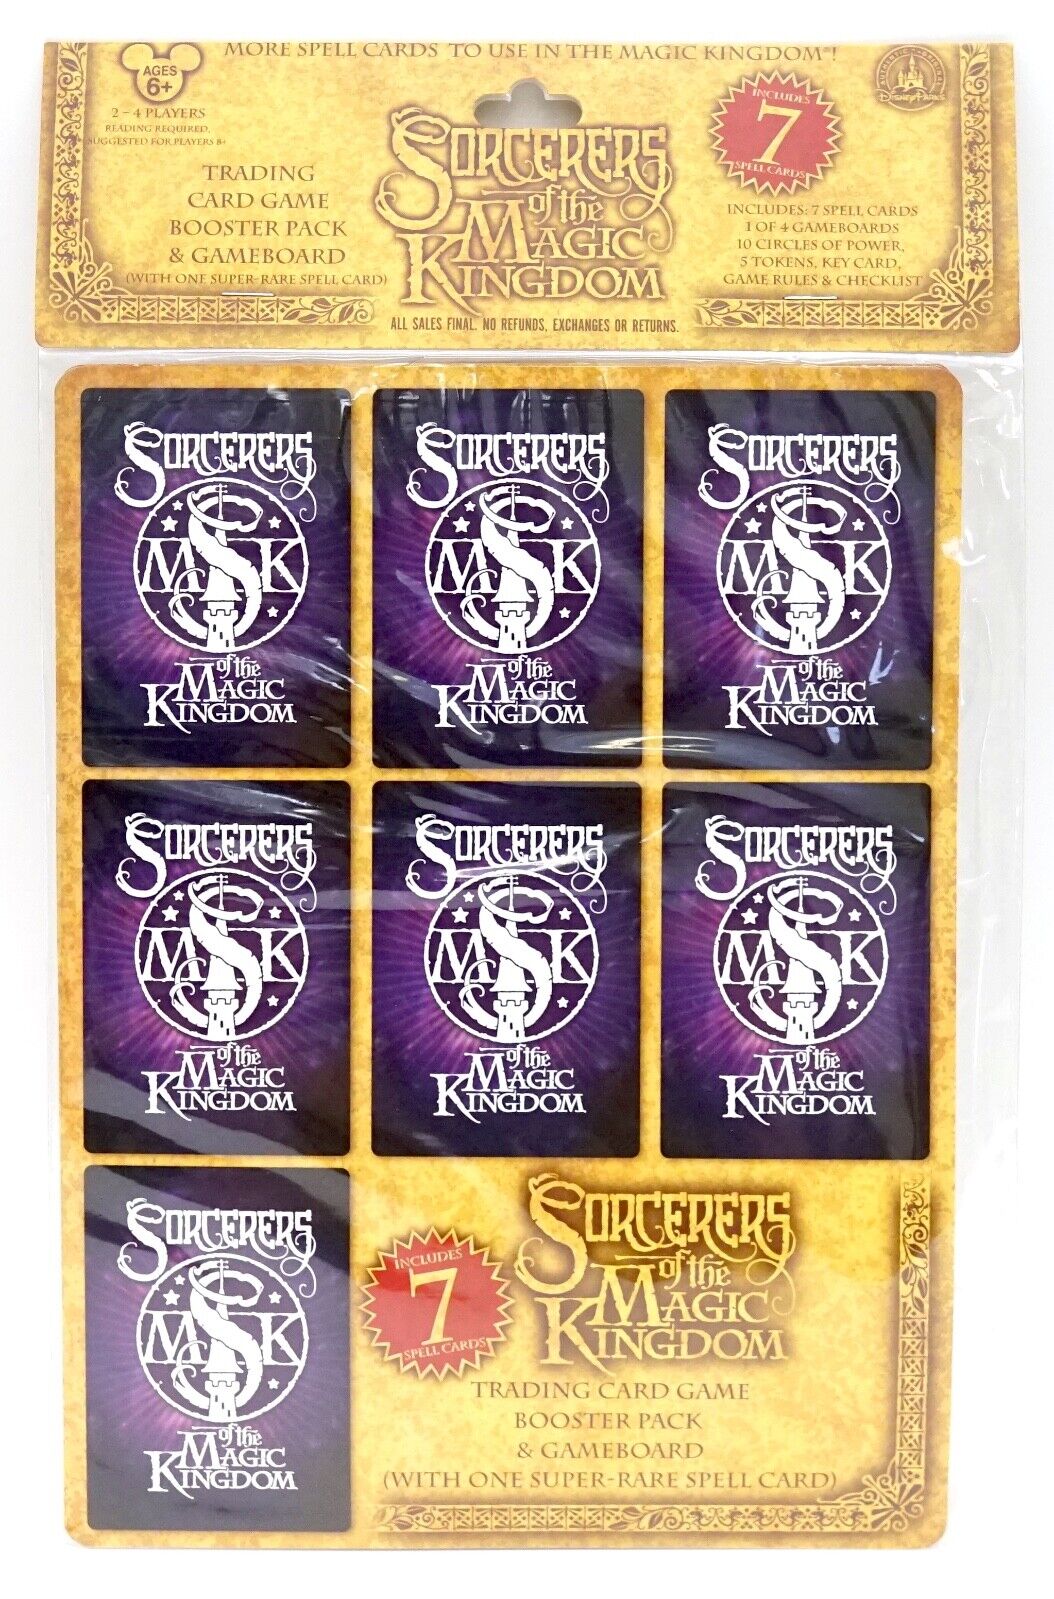 New Disney Sorcerers Magic Kingdom Trading Card Game Booster & Gameboard Pack